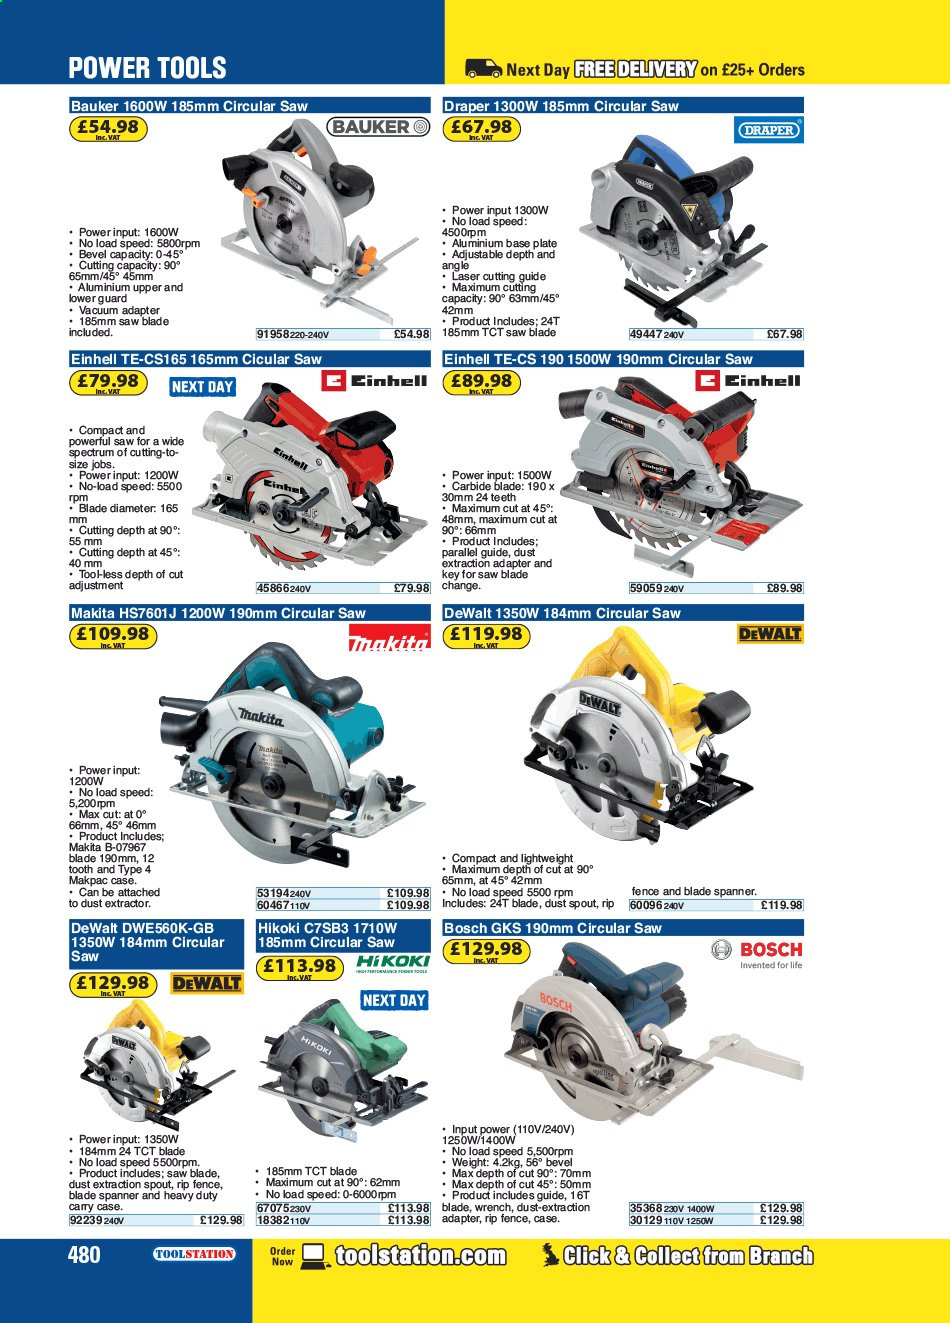 thumbnail - Toolstation offer  - Sales products - Bosch, DeWALT, power tools, Makita, circular saw, saw, wrench, spanner, dust extractor. Page 480.